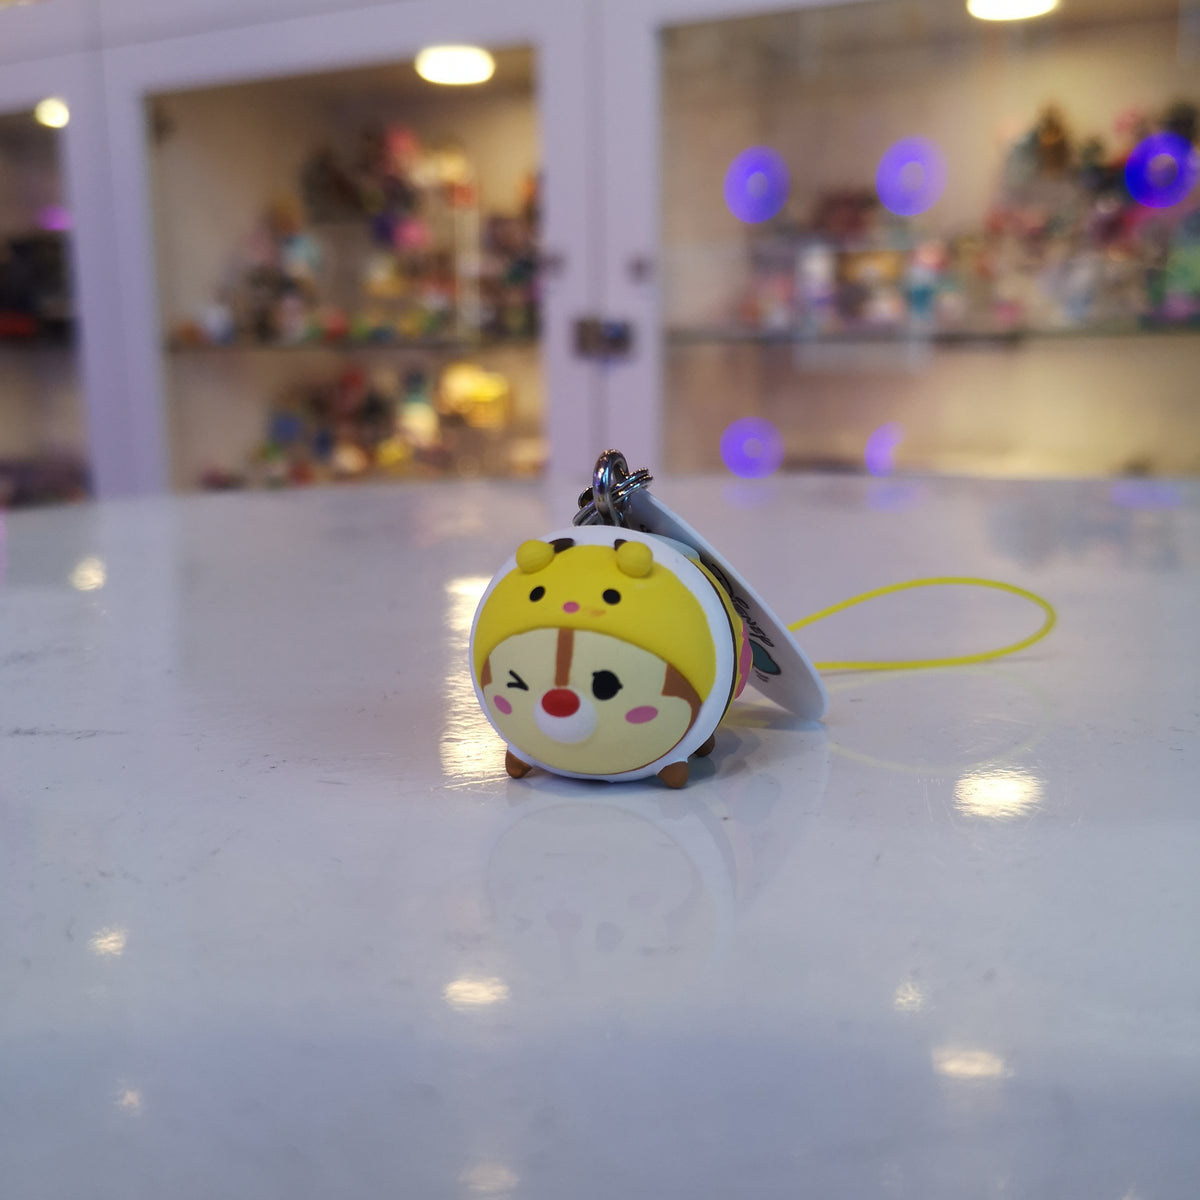 Dale Winking Tsum Tsum Keychains Charms by Disney